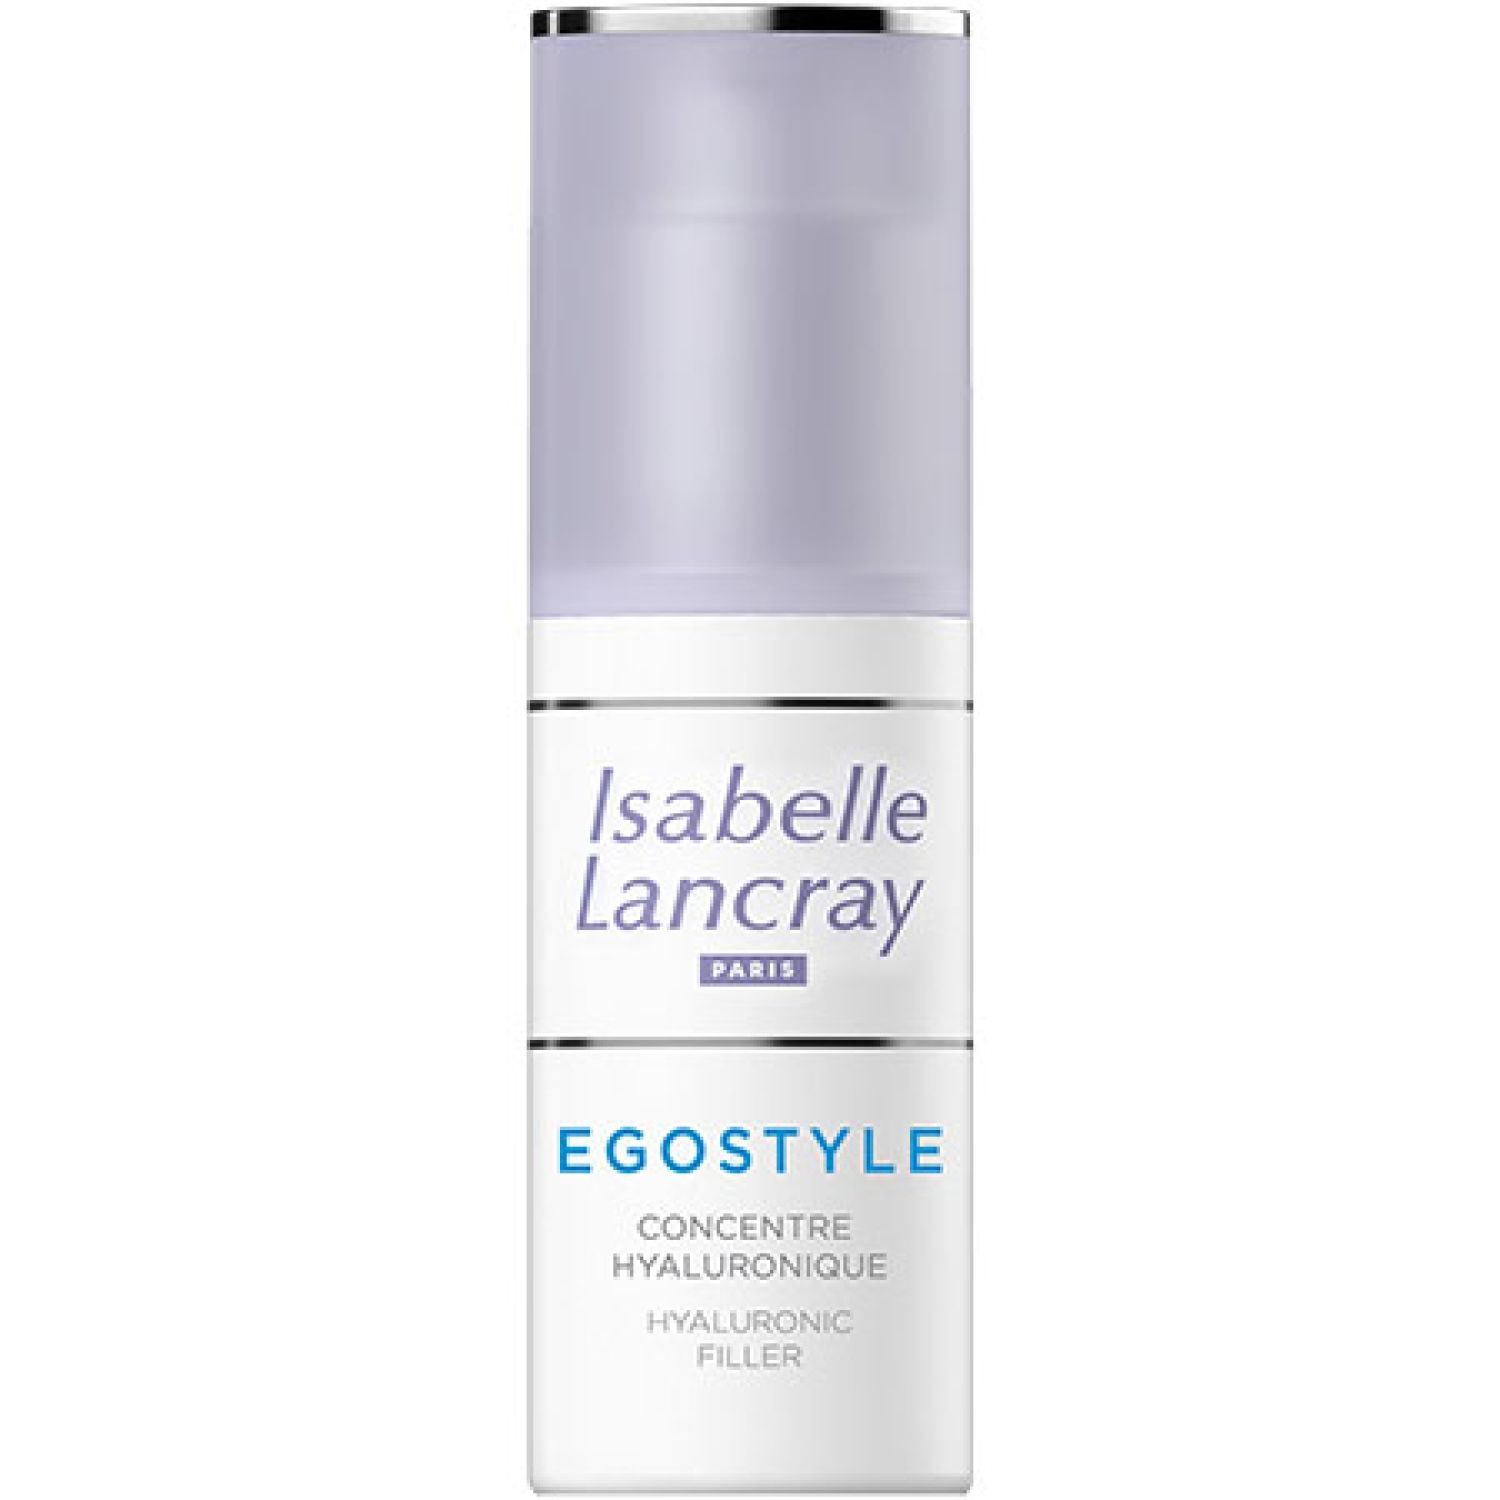 Isabelle Lancray EGOSTYLE Concentre Hyaluronique